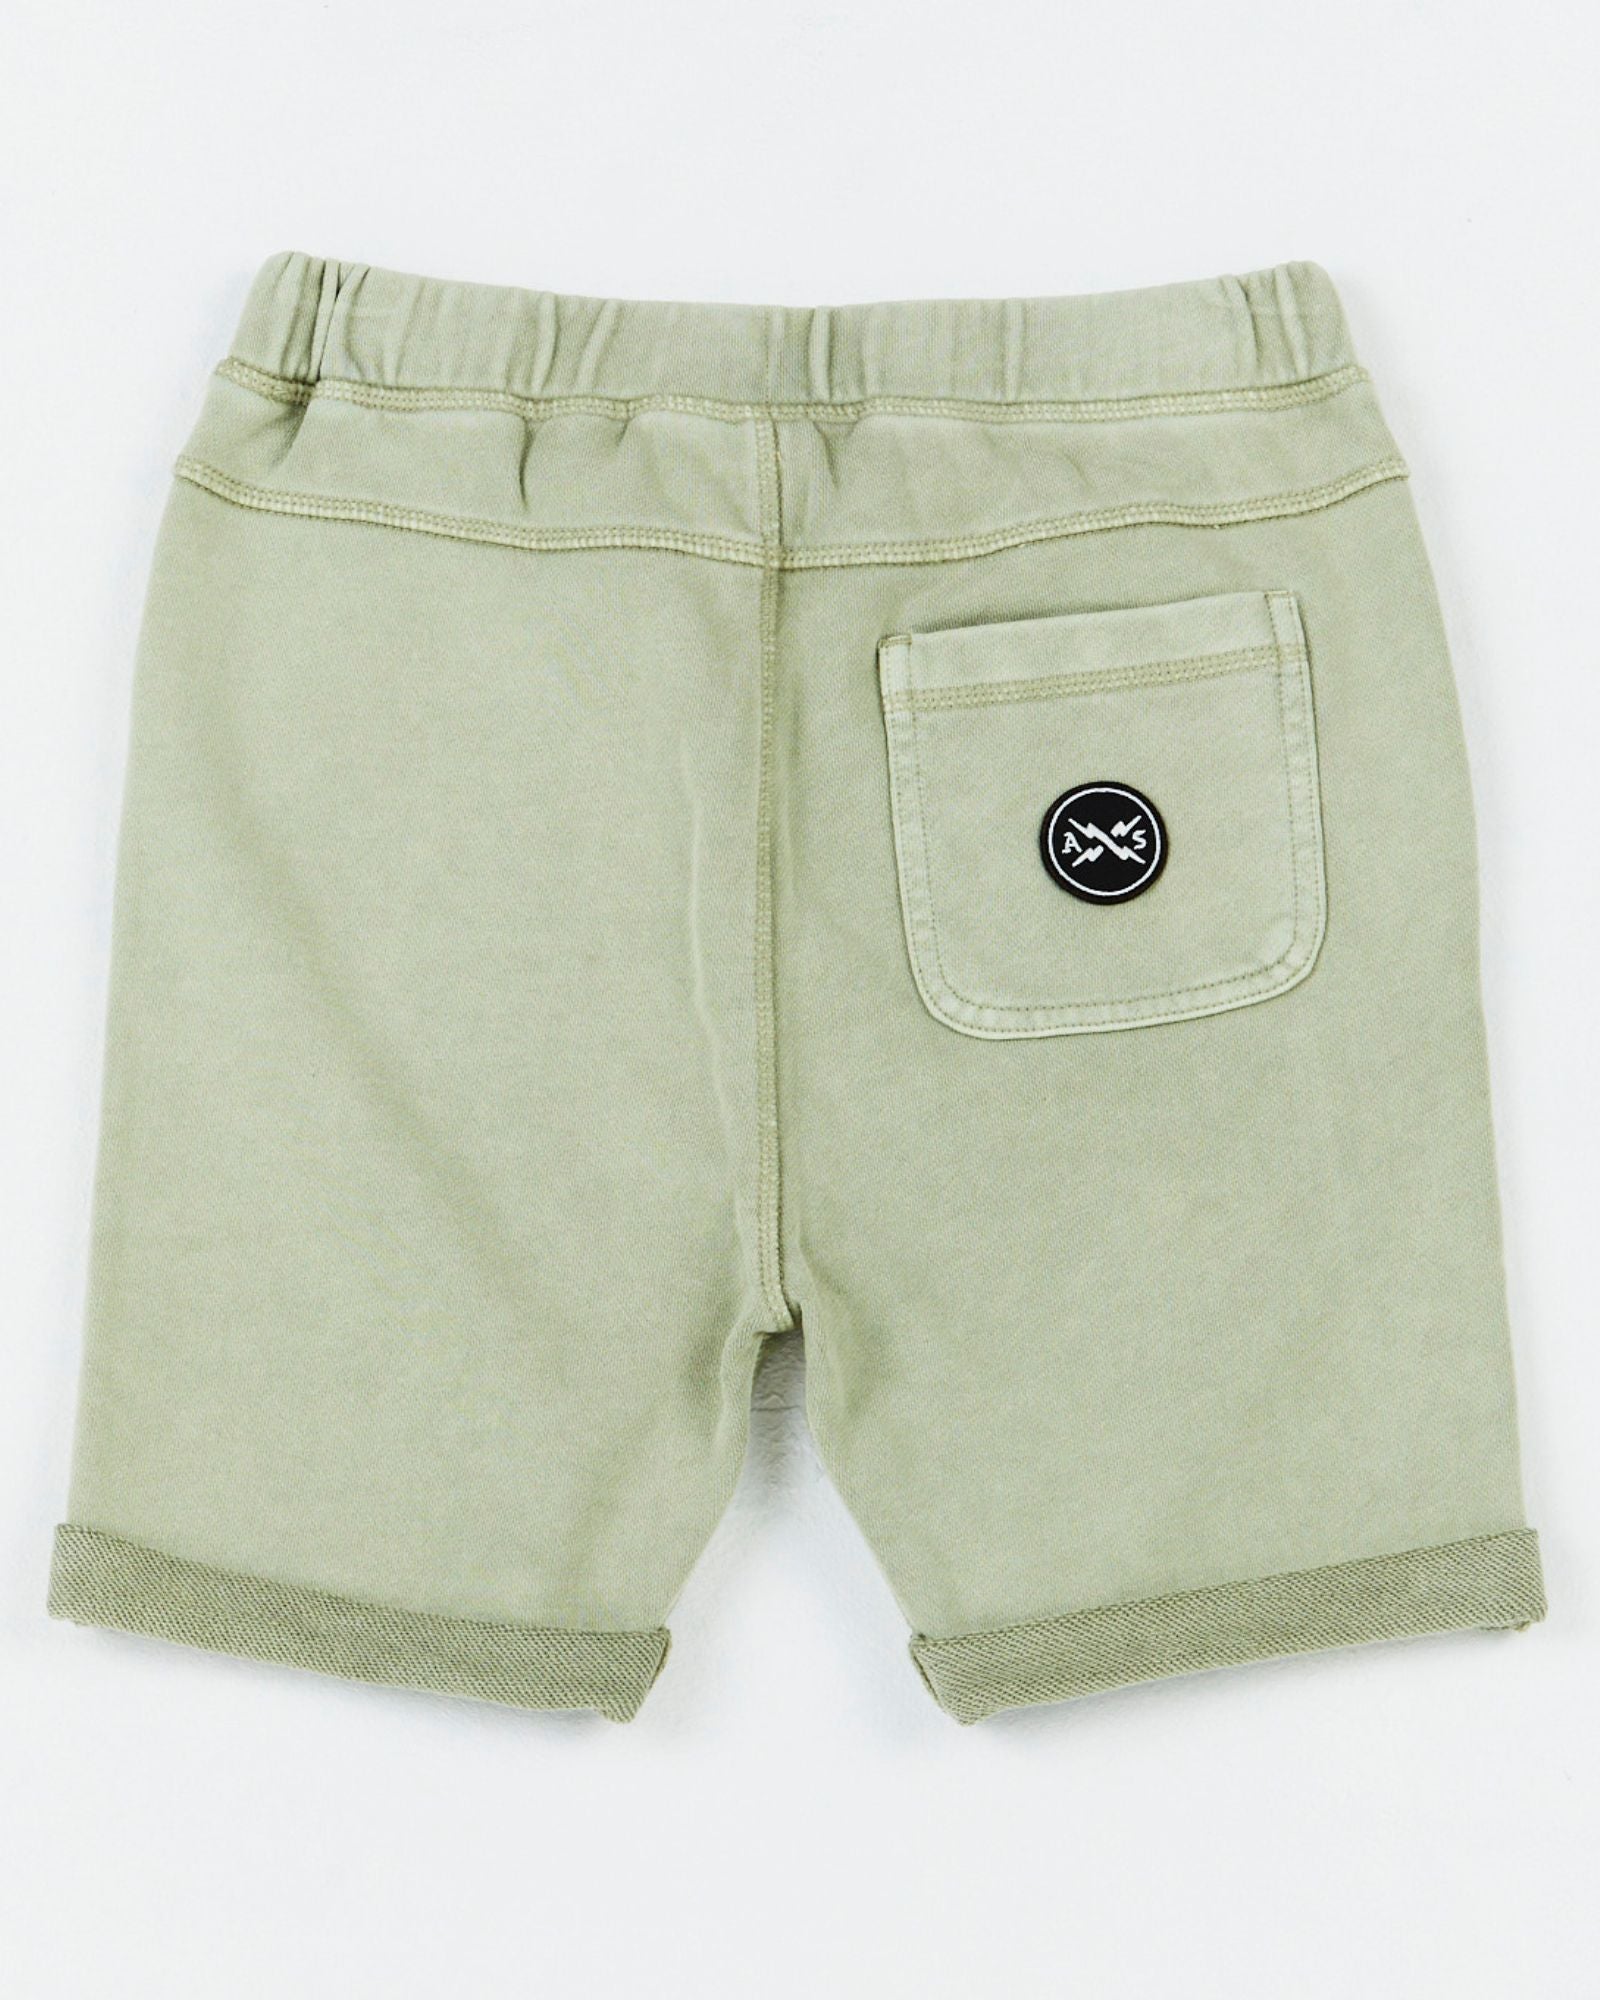 Alphabet Soup's Fakie Shorts for boys aged 2-7, feature Thyme green Cotton French Terry w/roll-up hems, adjustable drawcord, faux-fly & pockets. Plus an embroidered logo at the back pocket.